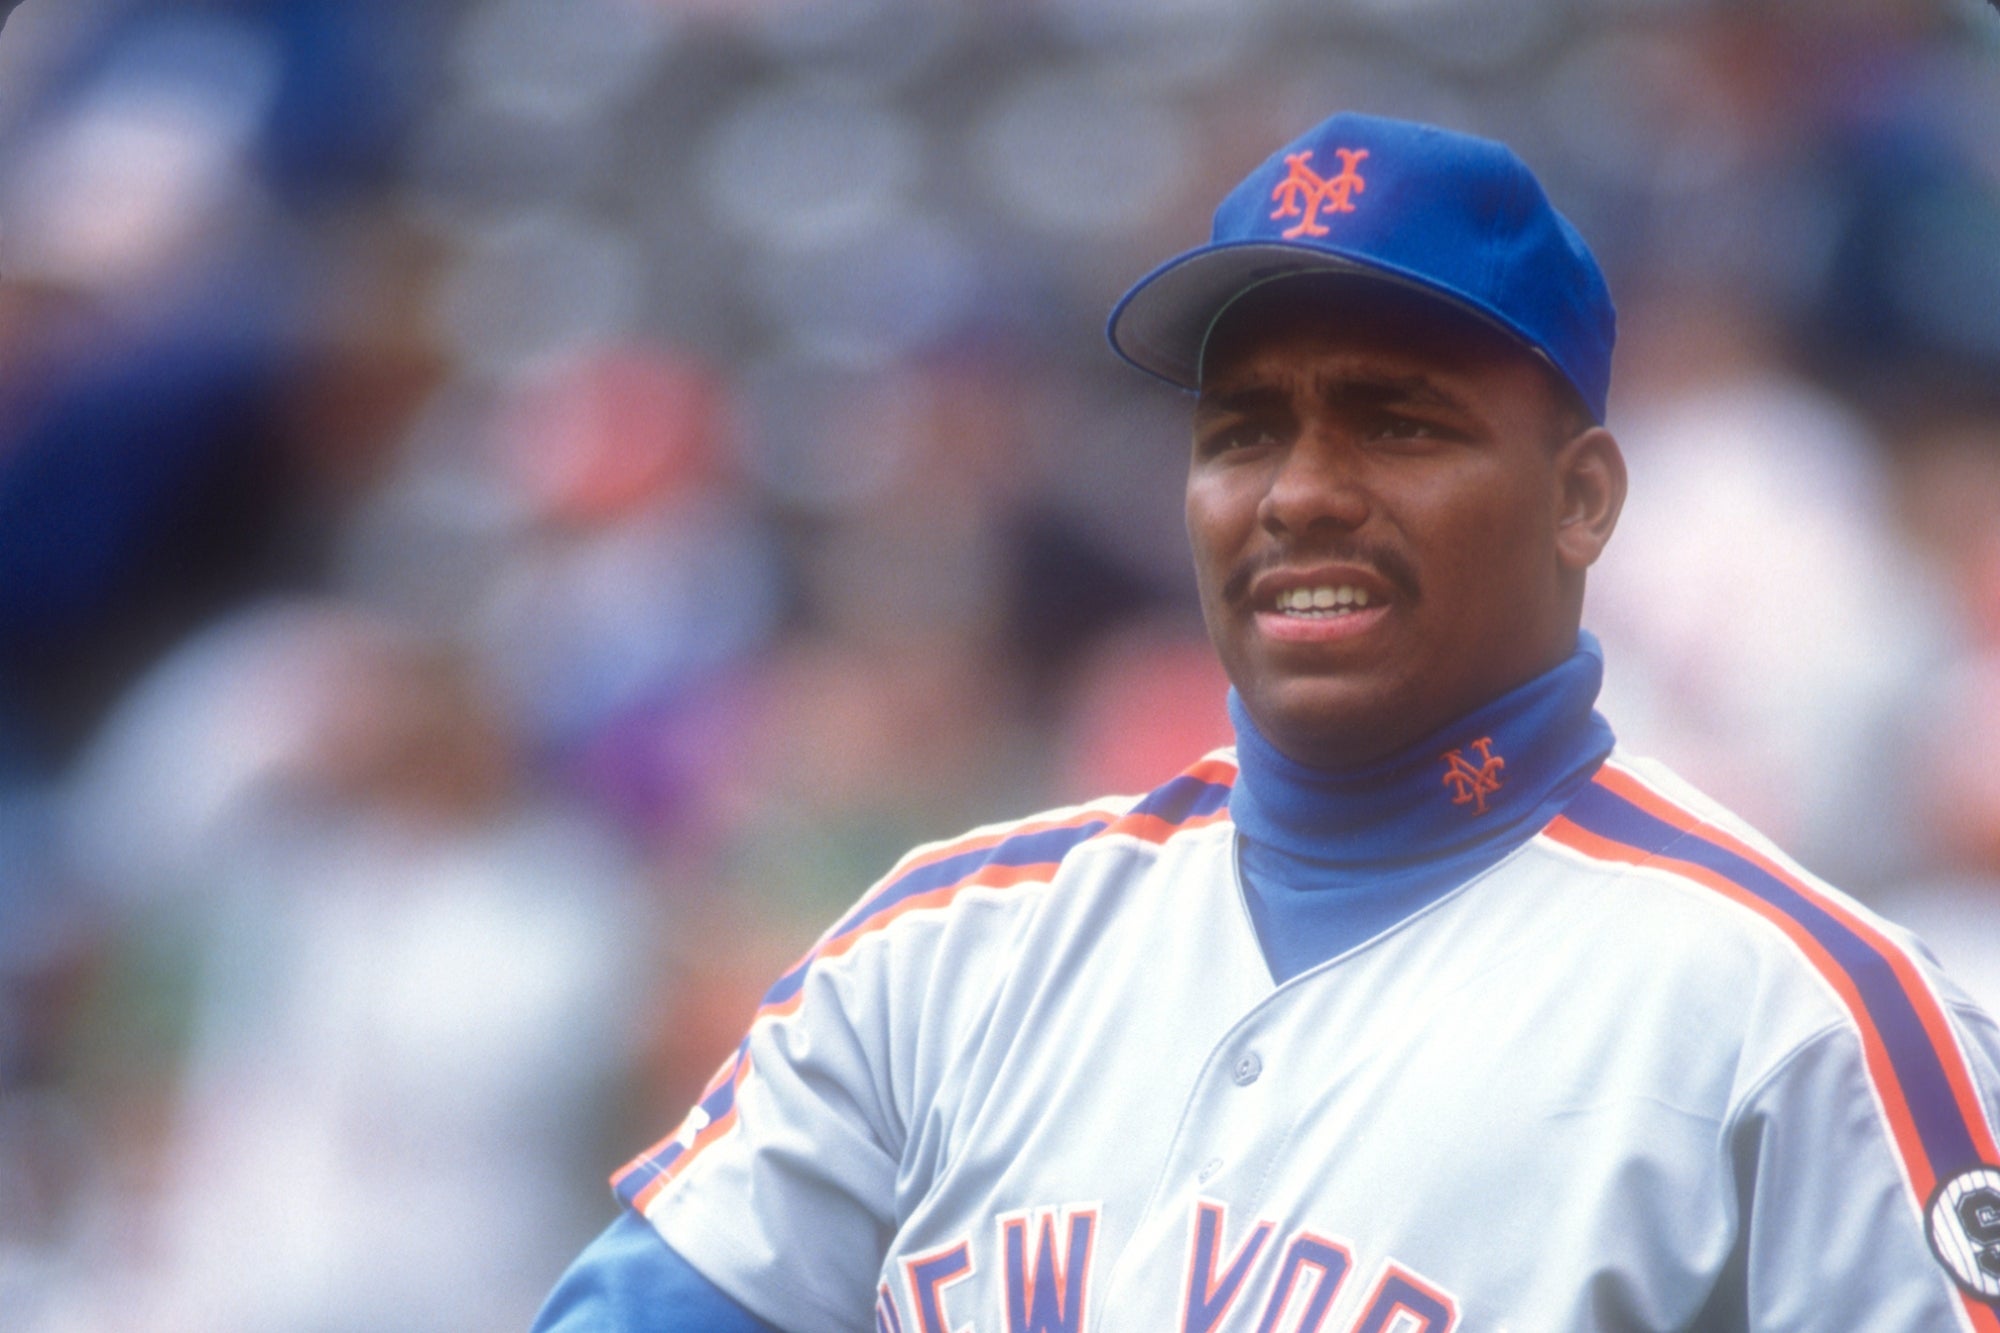 Bobby Bonilla hasn't played in the MLB since 2001, but the New York Mets  still pay him $1 million every year